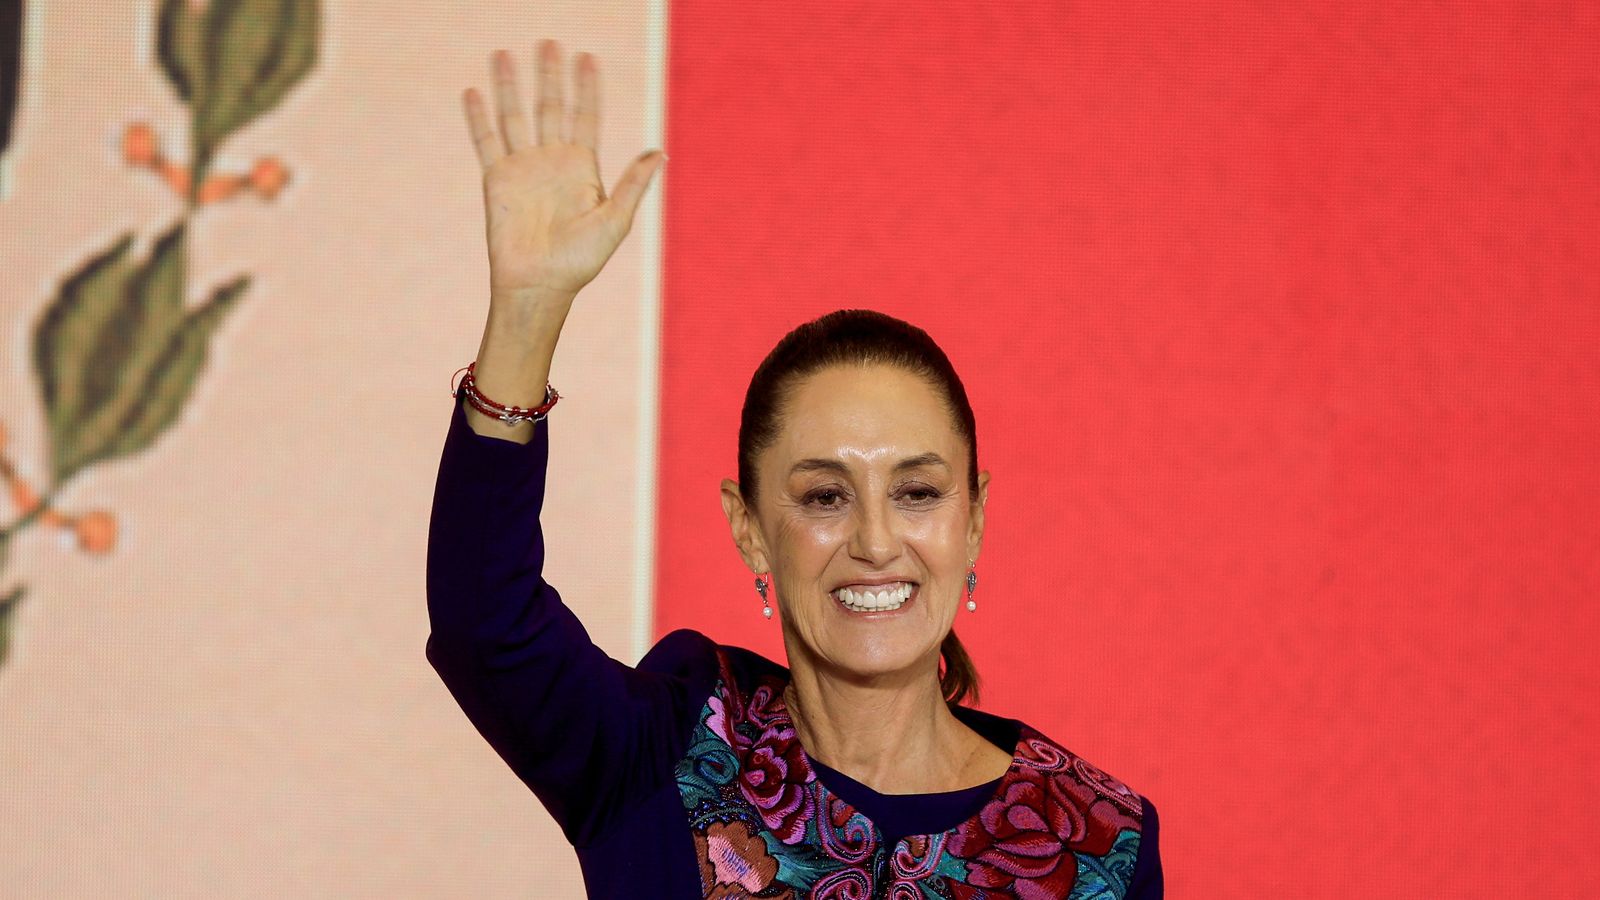 Mexico election: Claudia Sheinbaum wins contest and is set to become country's first woman president, says official quick count